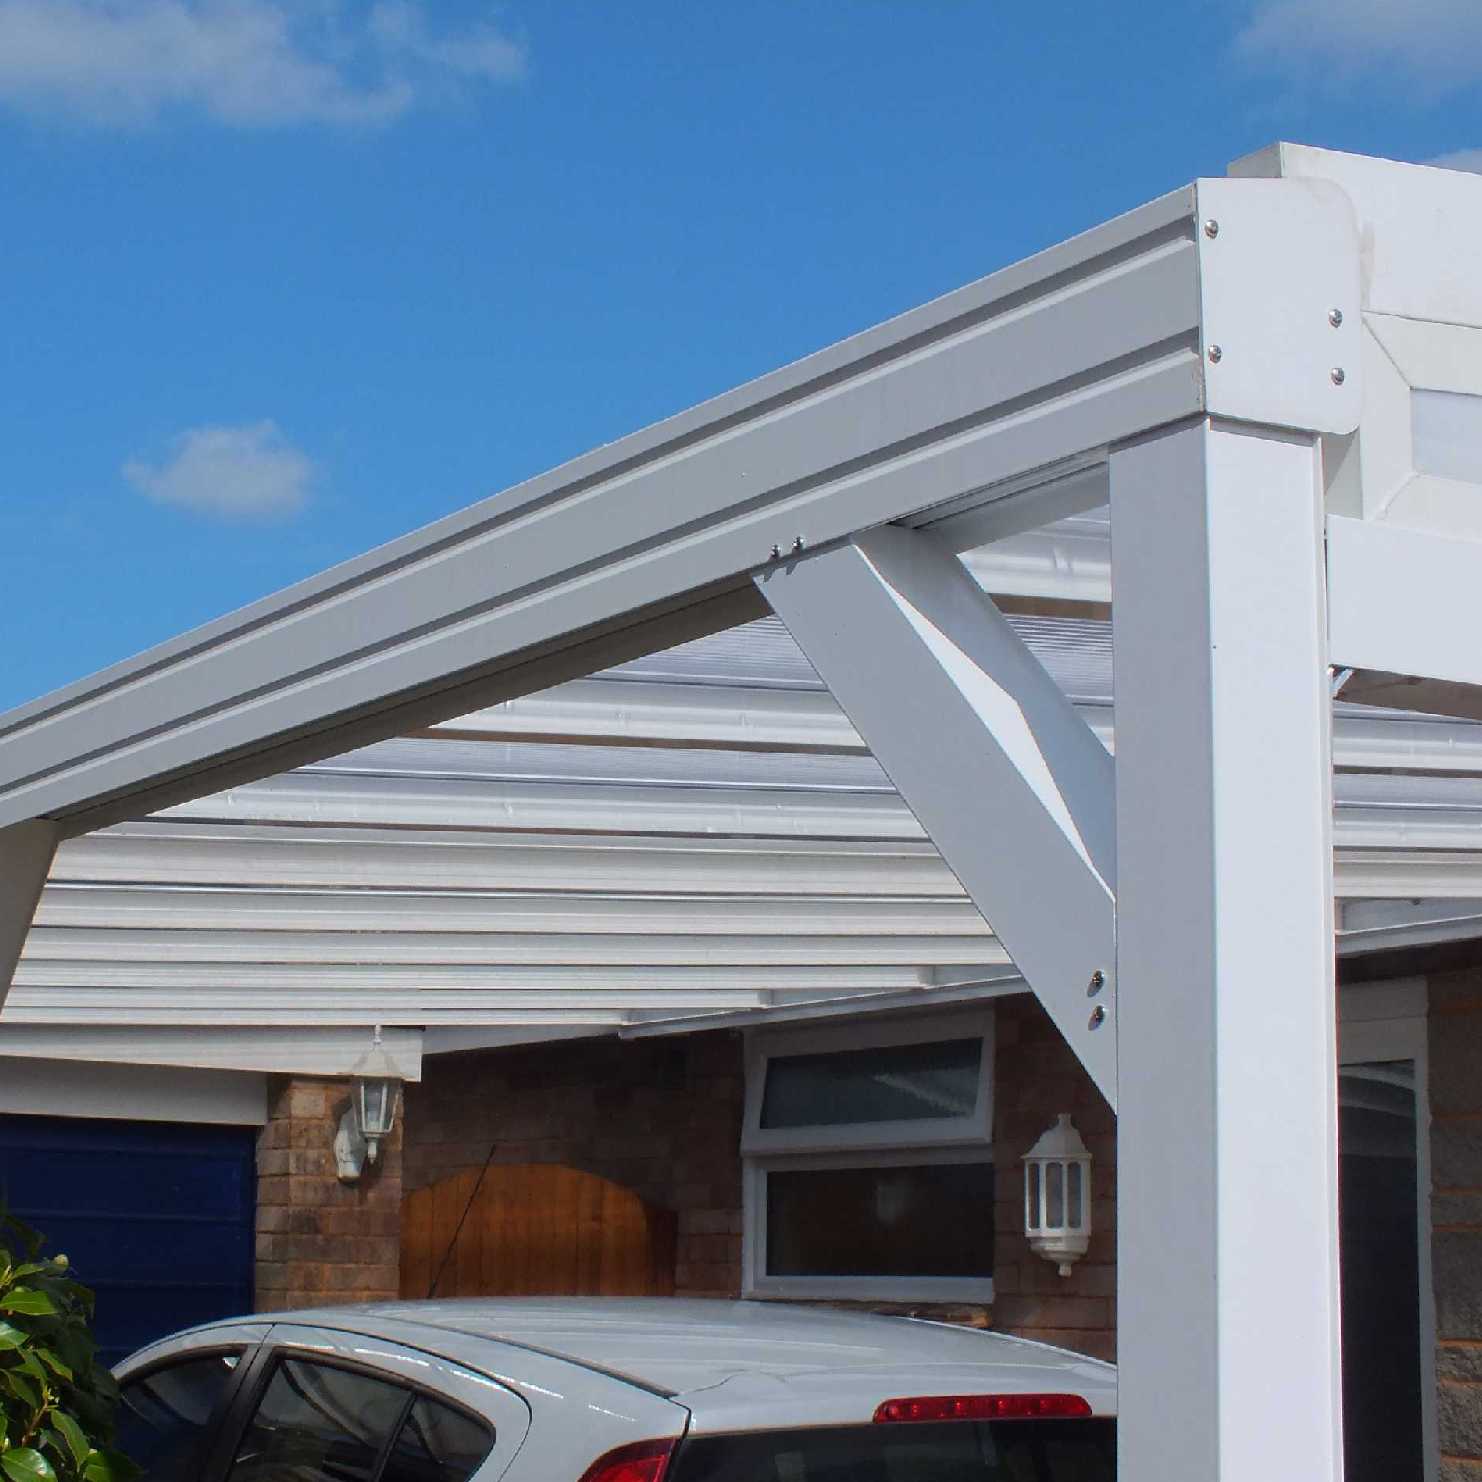 Buy Omega Smart Lean-To Canopy, White with 16mm Polycarbonate Glazing - 8.0m (W) x 4.5m (P), (4) Supporting Posts online today